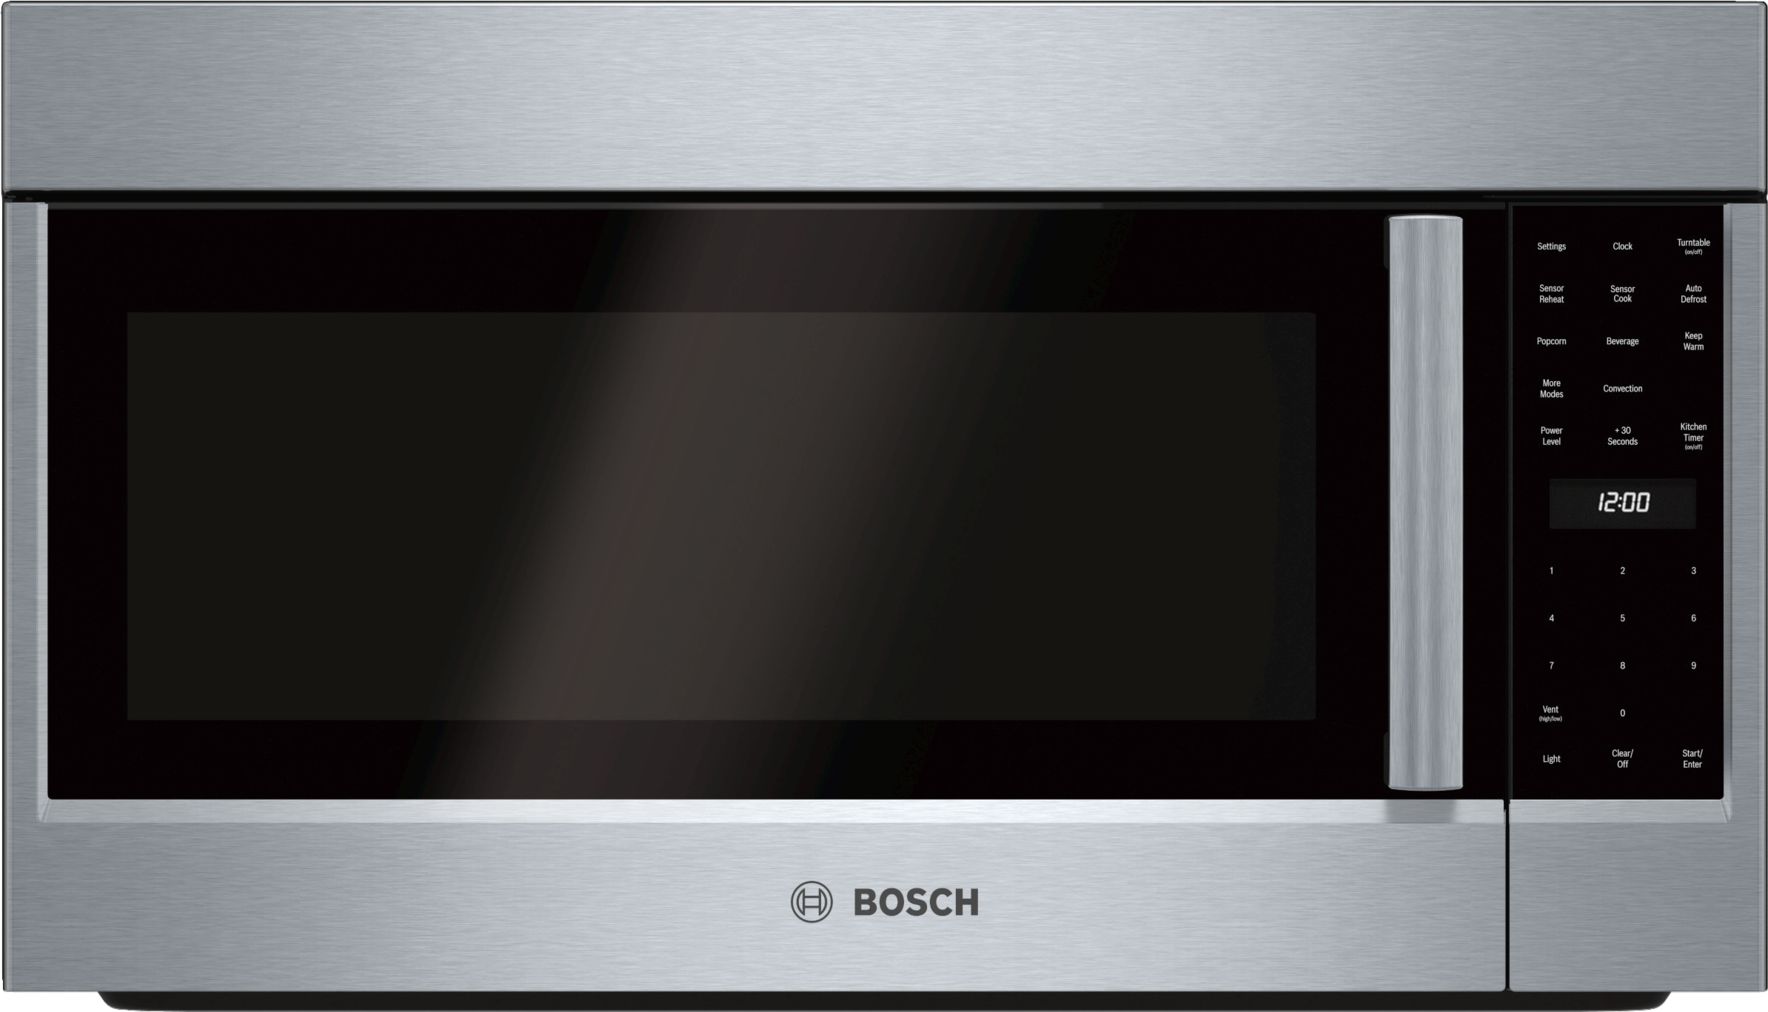 Bosch Microwaves - Cooking Appliances - Arizona Wholesale Supply